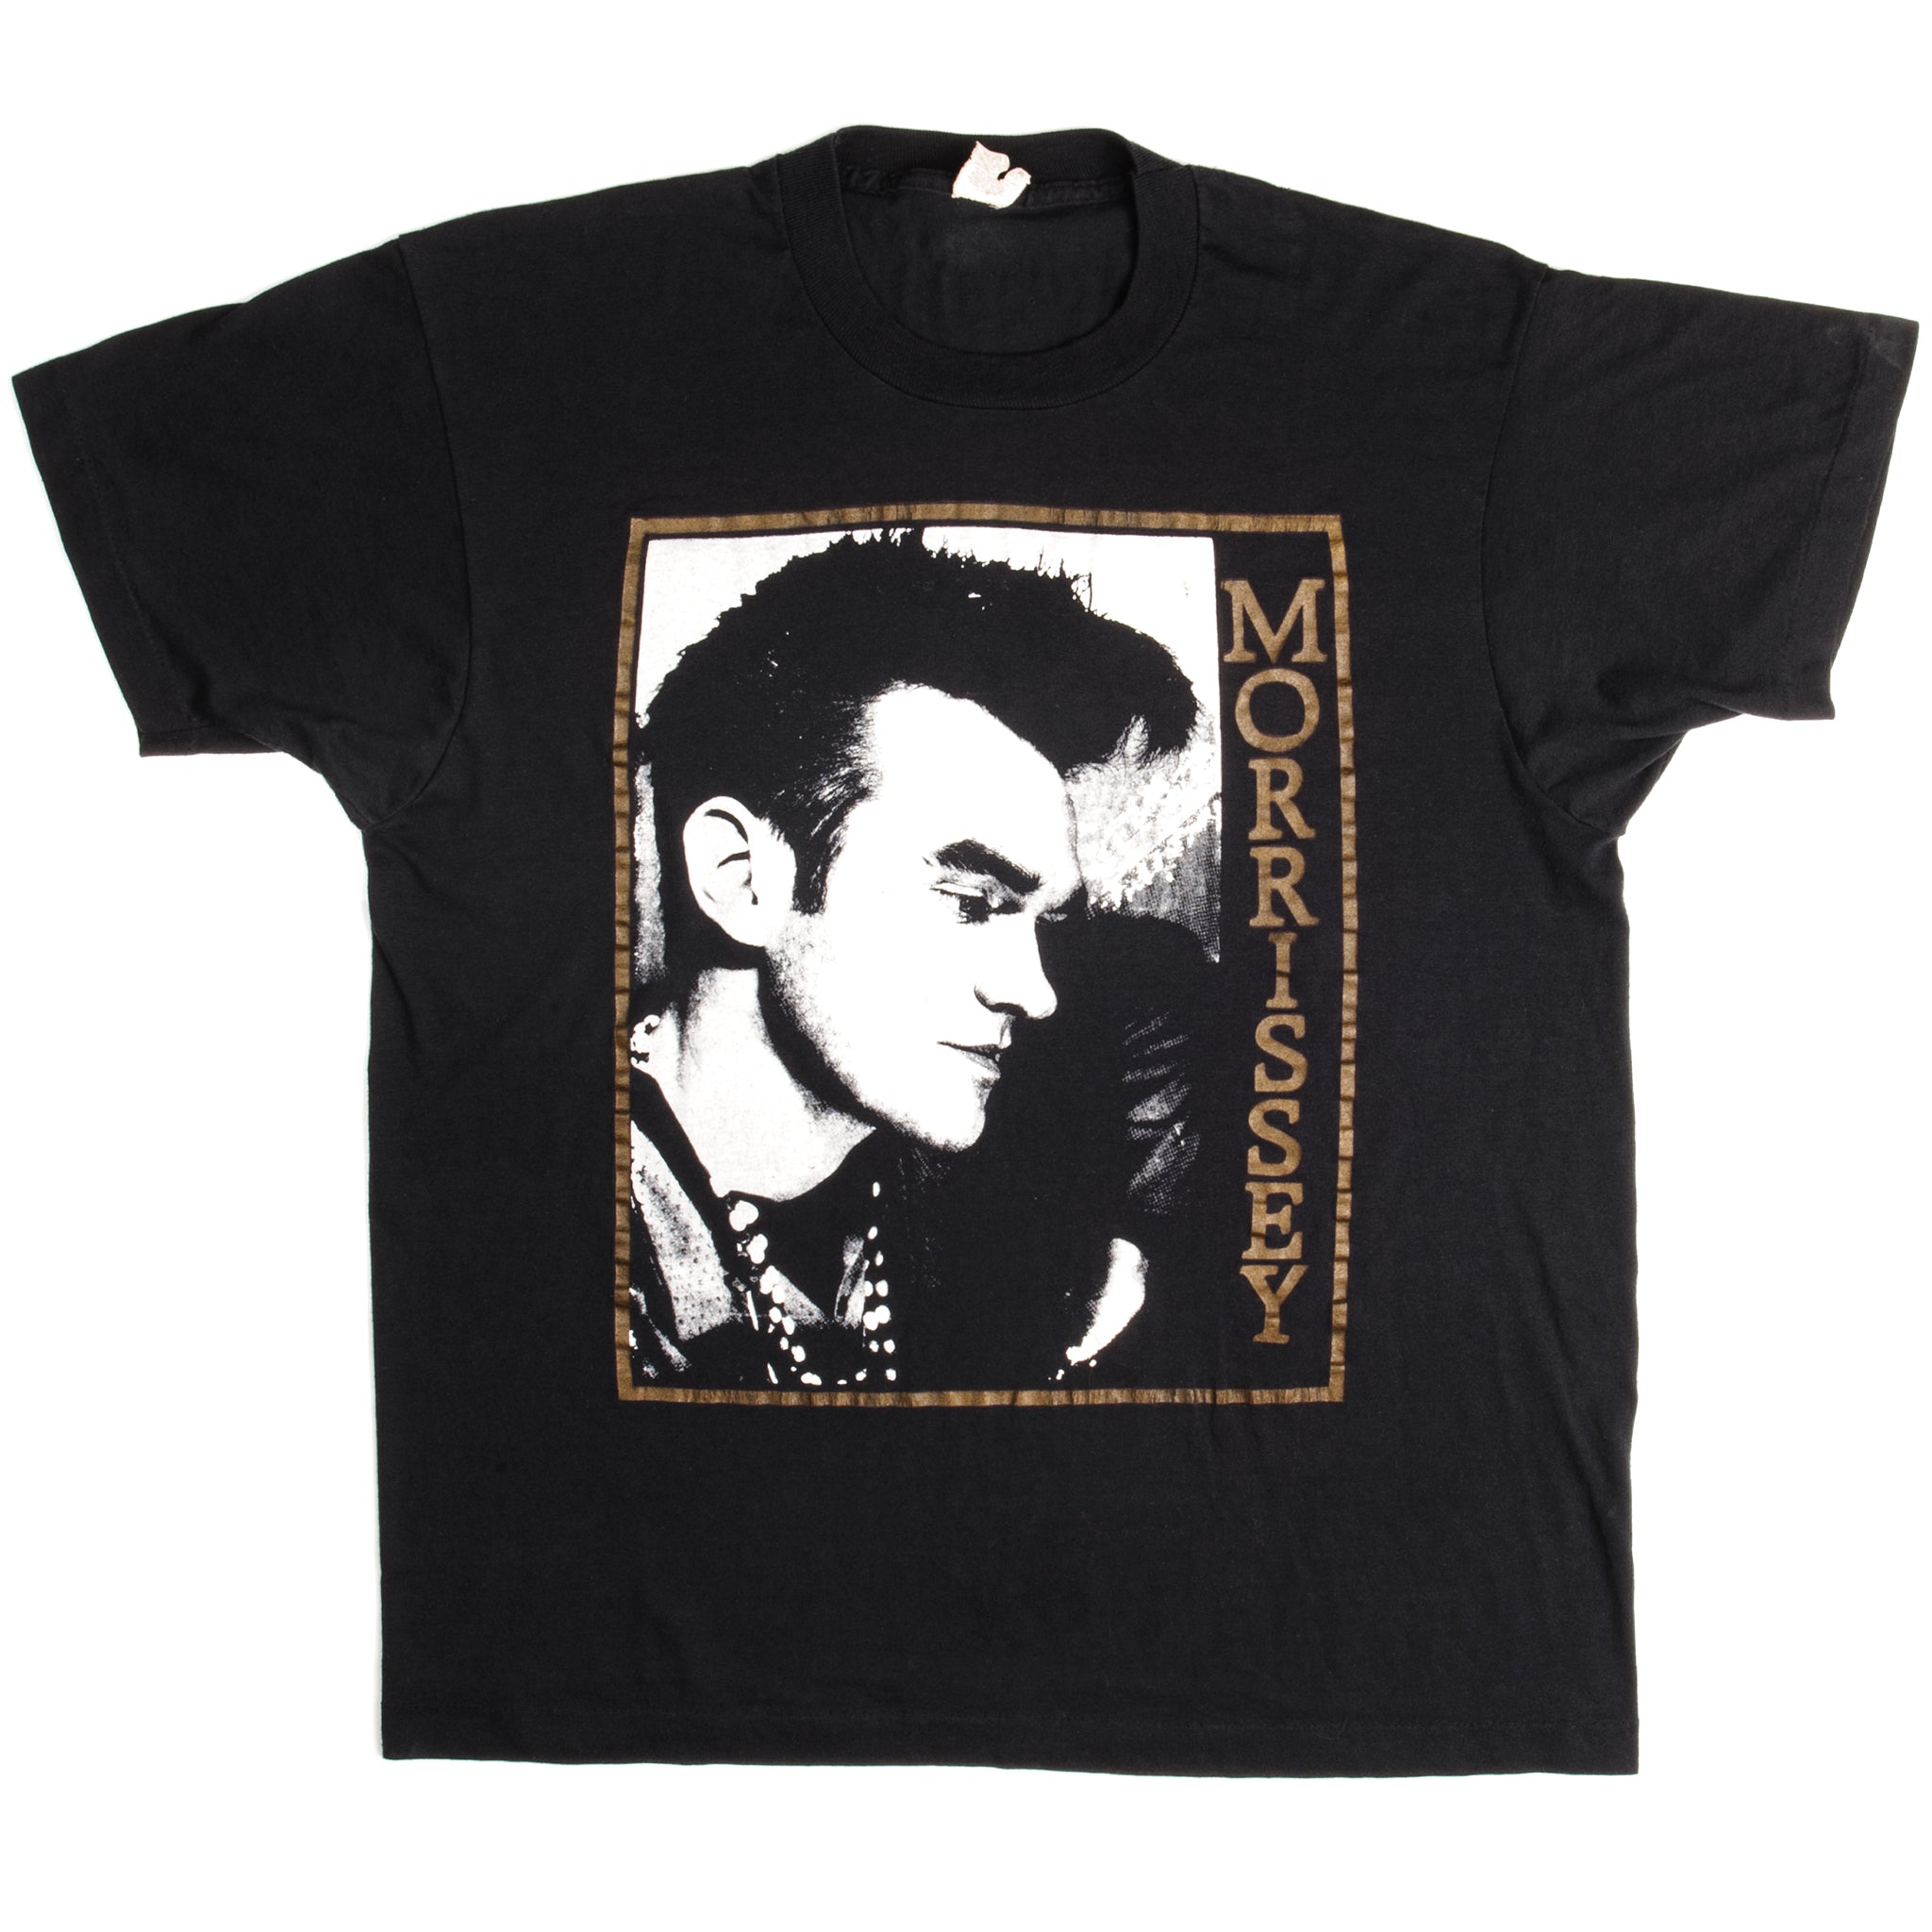 VINTAGE MORRISSEY THE SMITHS TEE SHIRT 1980s SIZE LARGE MADE IN USA